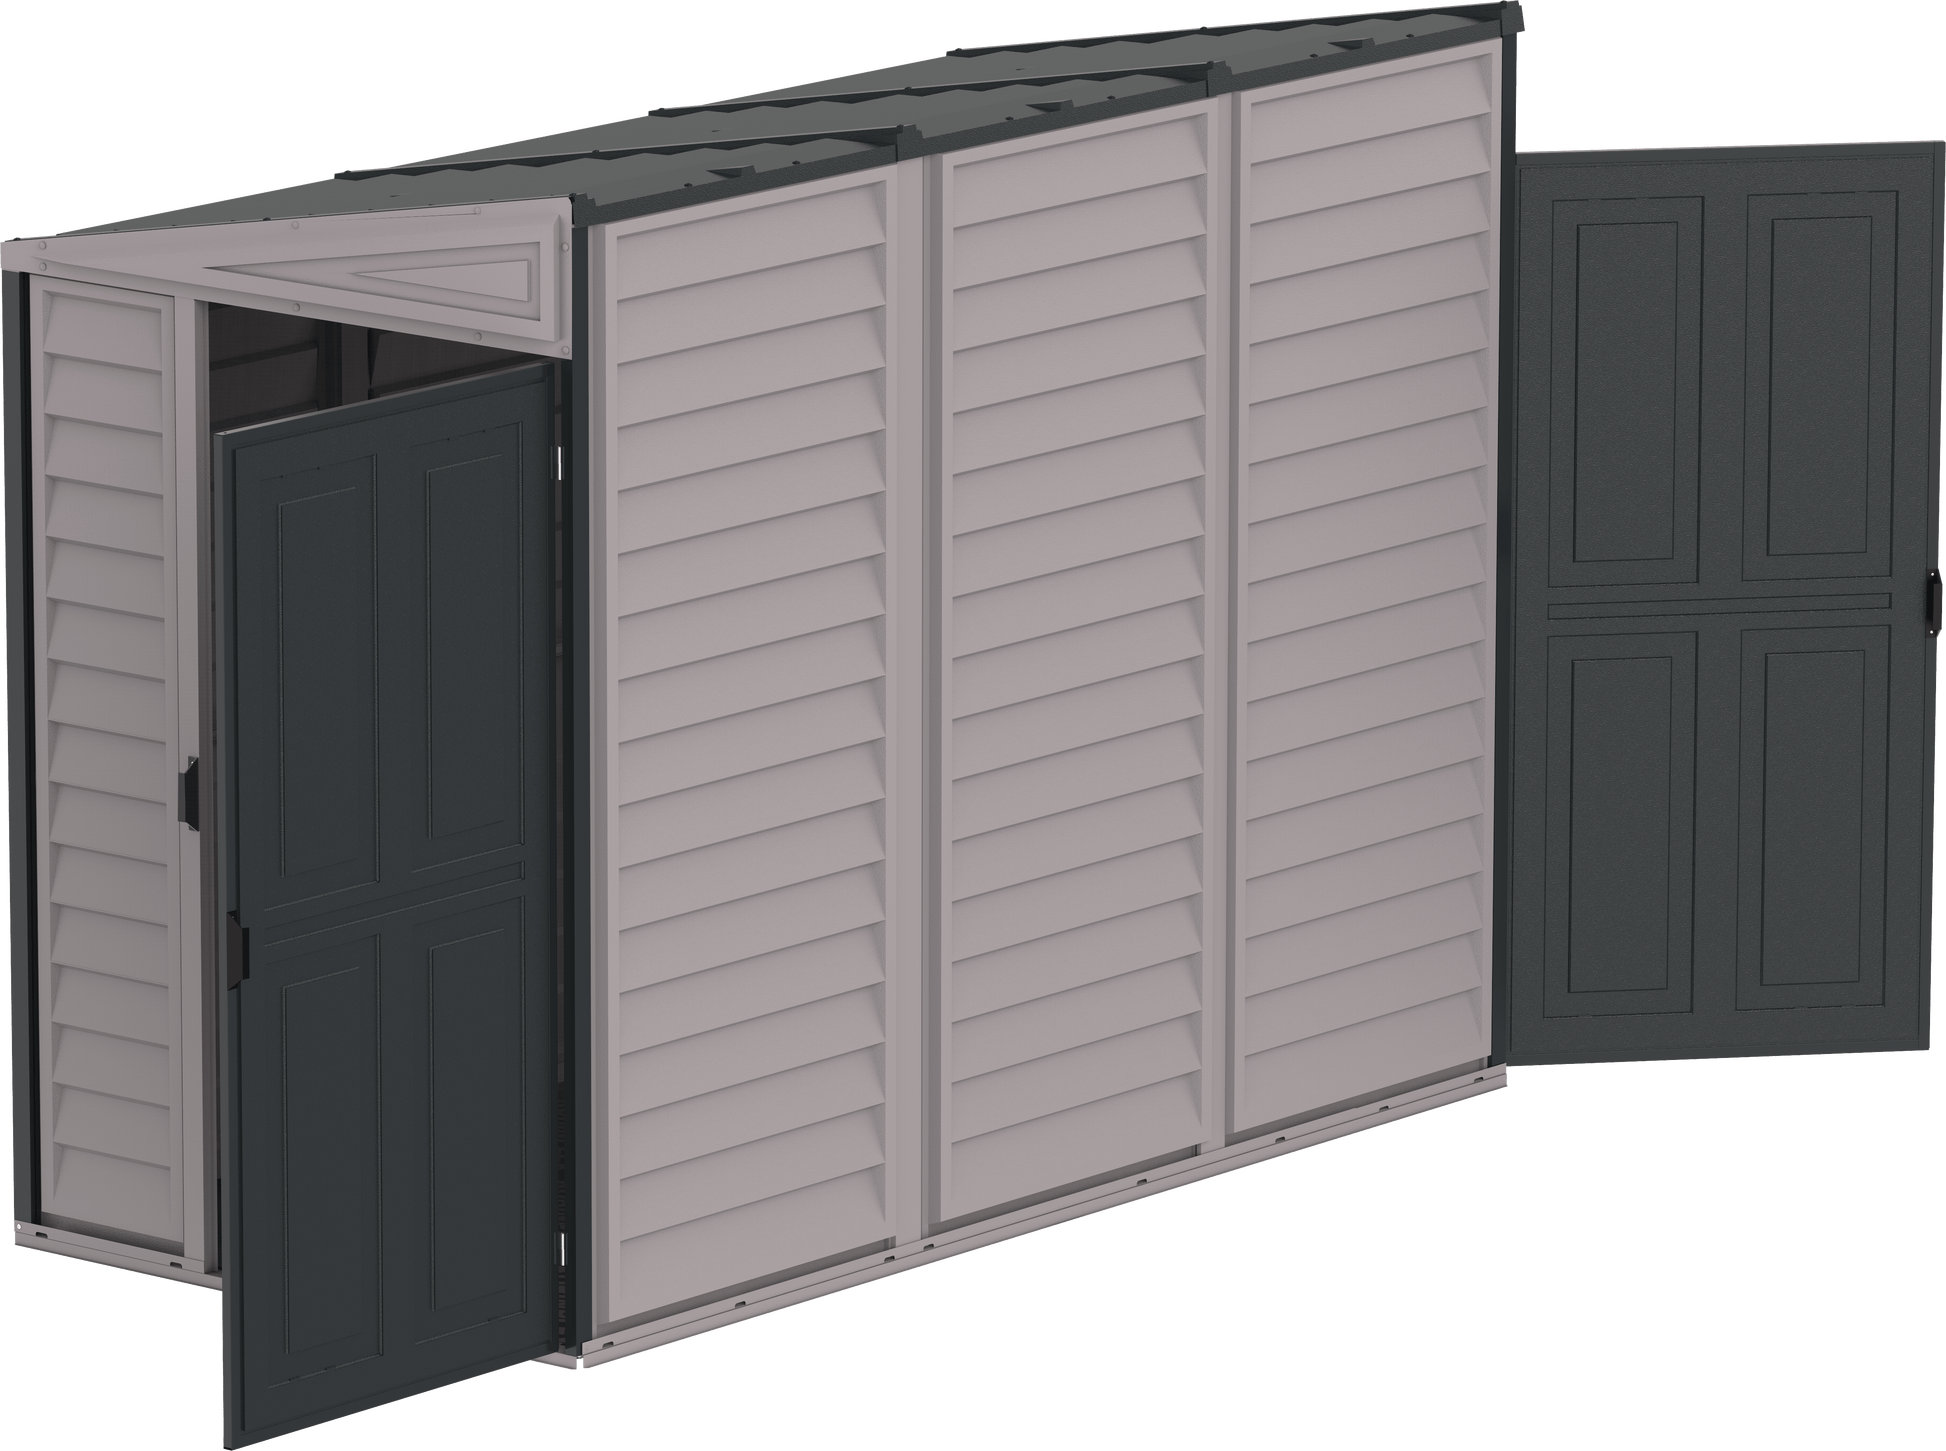 DuraMax Vinyl Shed 4x8 SideMate Plus with Foundation Kit